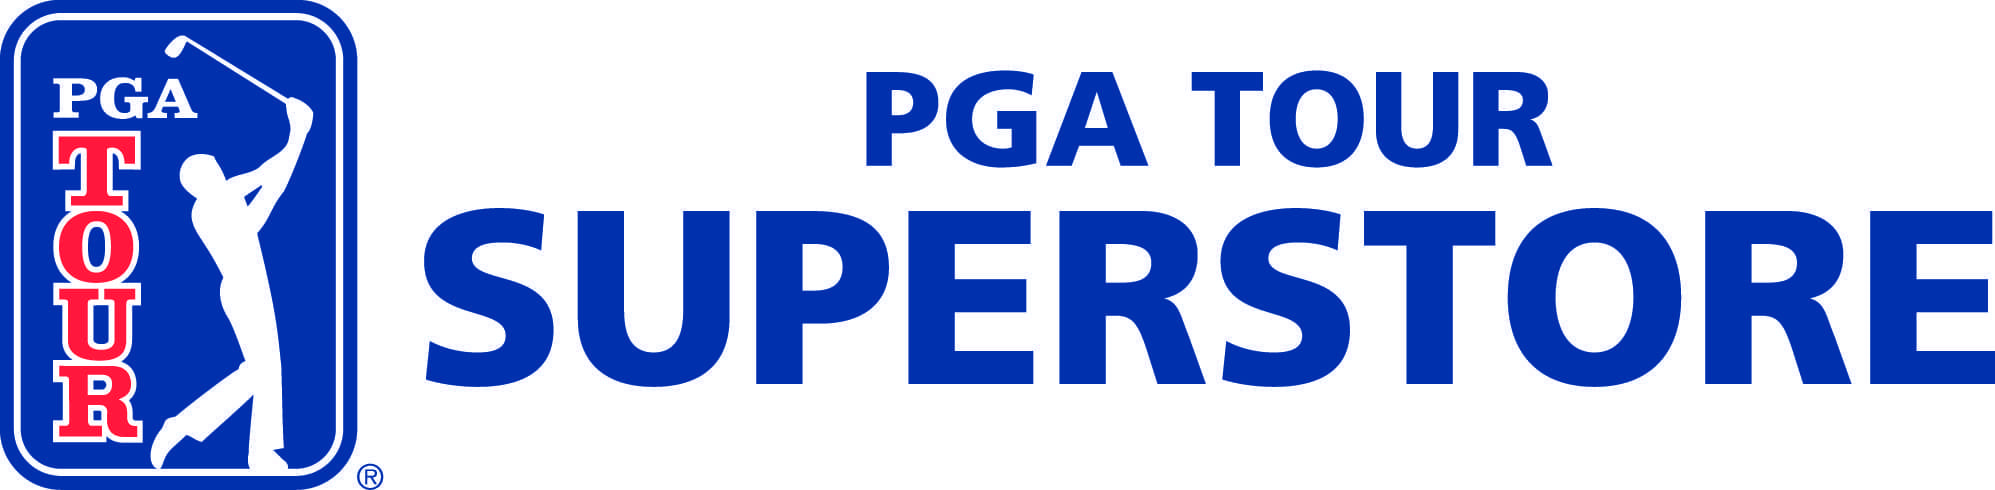 Superstore Logo - Buy Golf Clubs and Golf Equipment Online. PGA TOUR Superstore